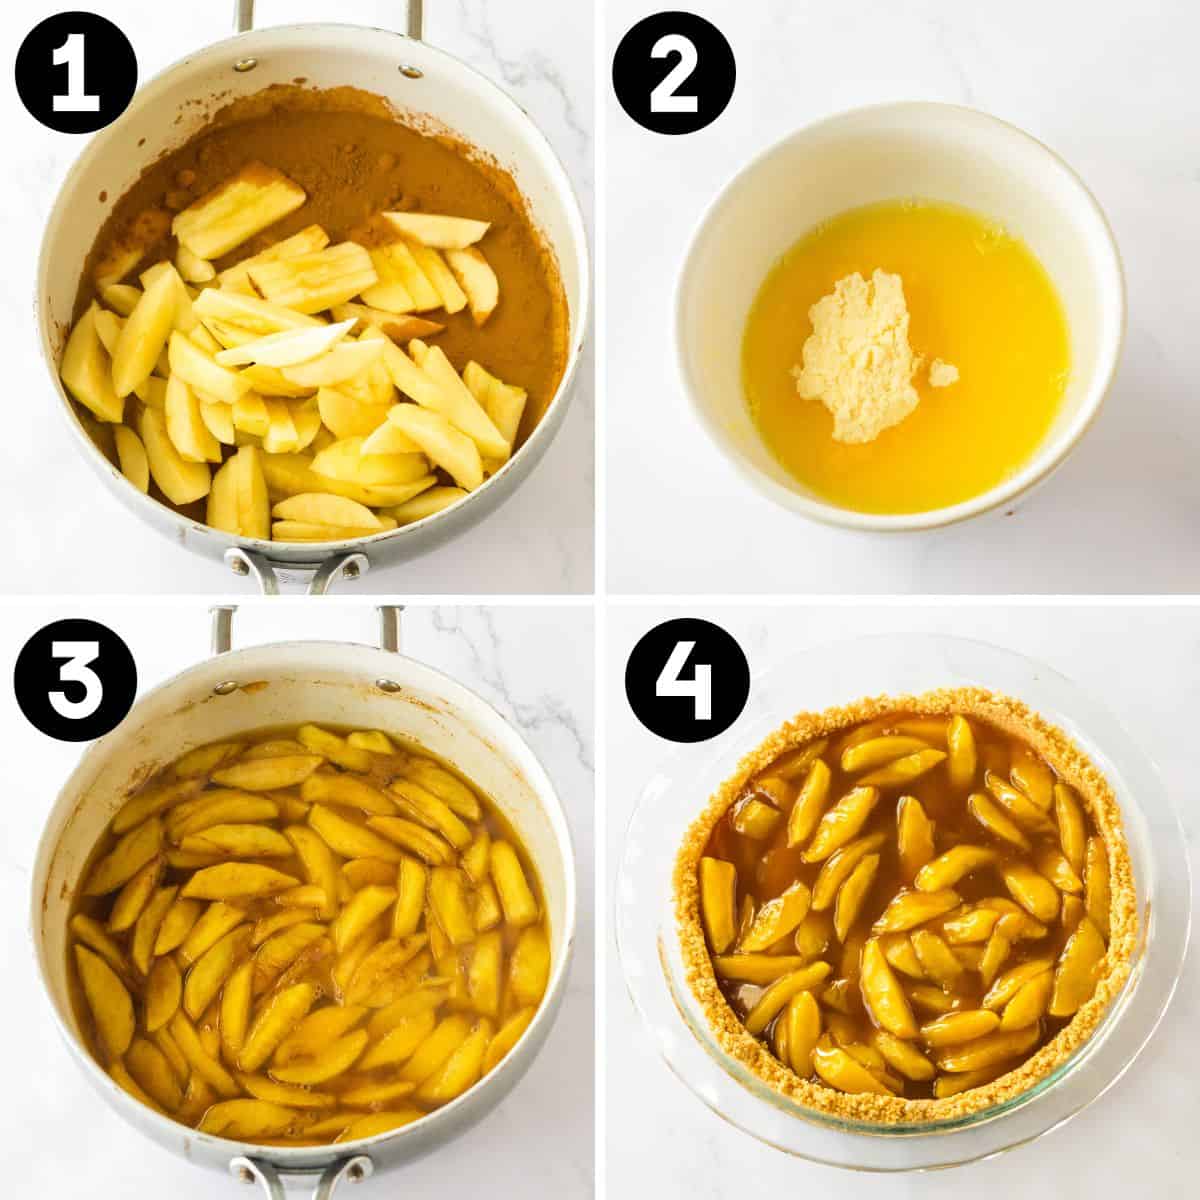 Four image collage featuring 1: sliced apples in cinnamon mixture in saucepan, 2: pudding mix and water in small bowl, 3: sautéed cinnamon sugar apples in pan, 4: pie filling added to pie crust.